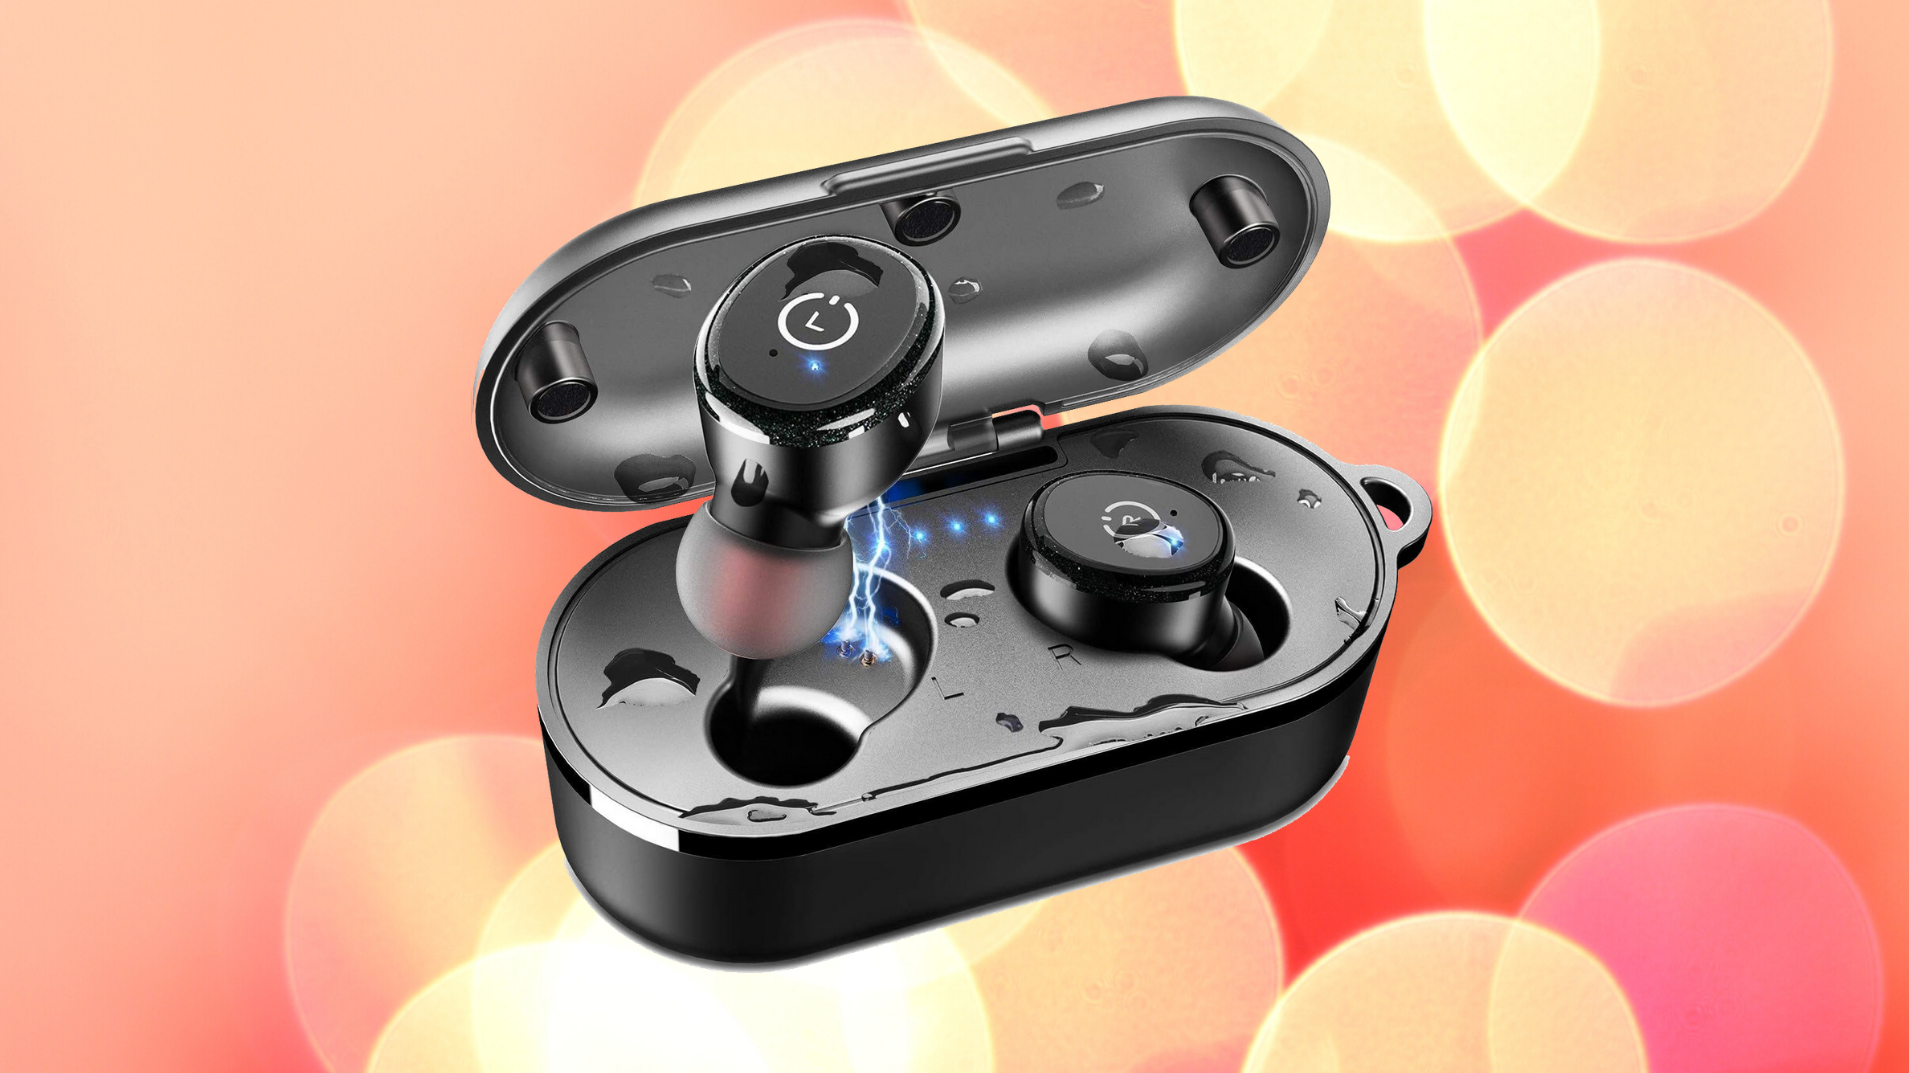 Most premium wireless earbuds are not waterproof — these are, and they’re on sale at Amazon for $24